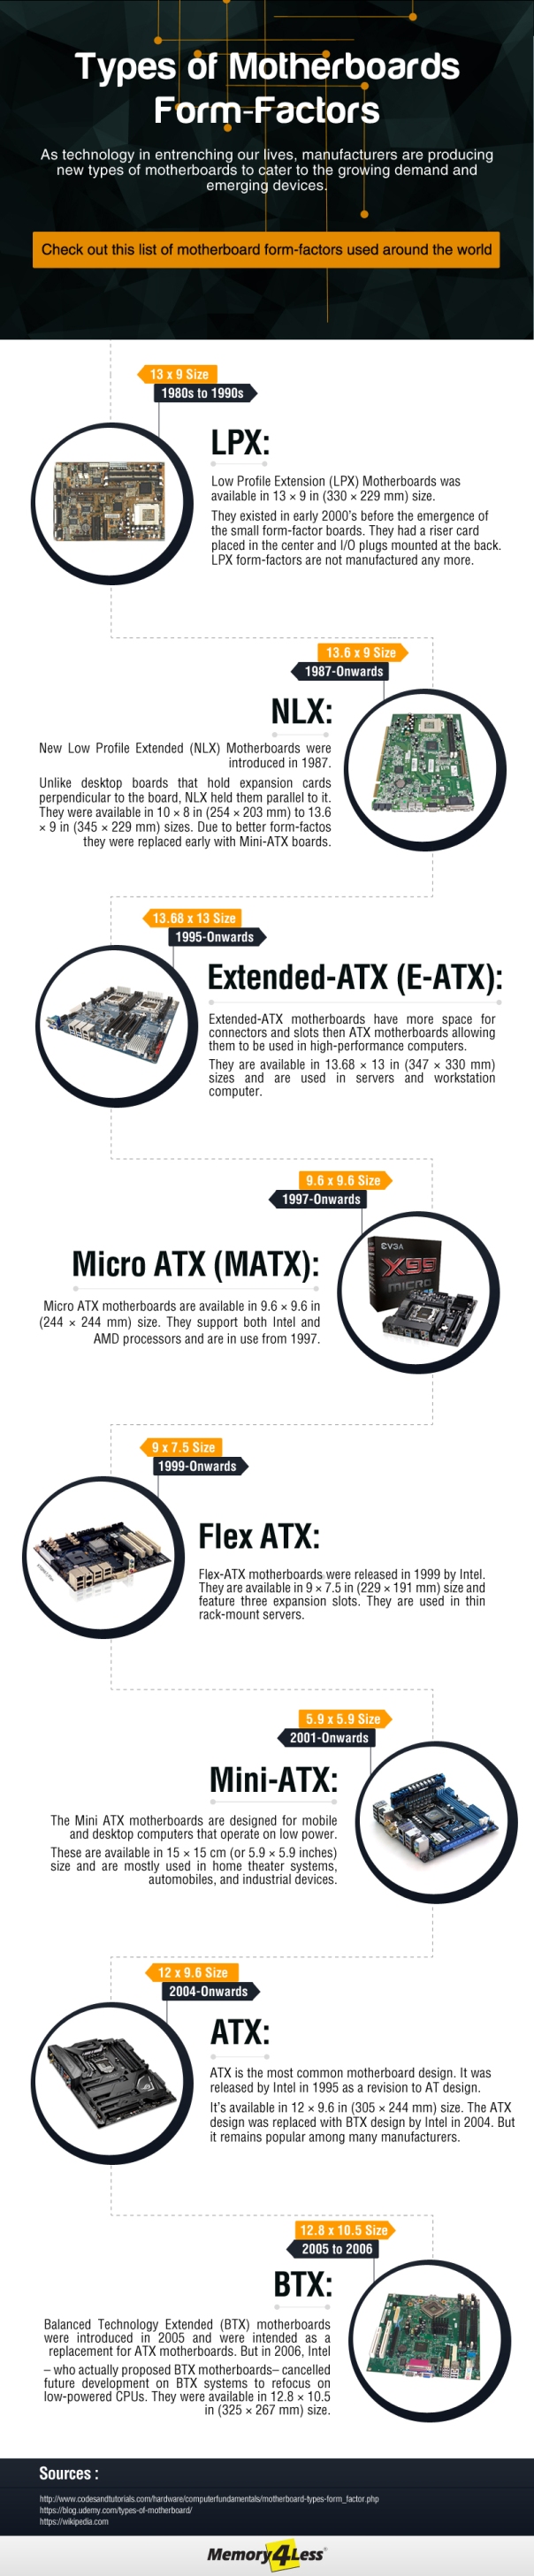 Types of MotherBoard Form-Factors Explained.jpg